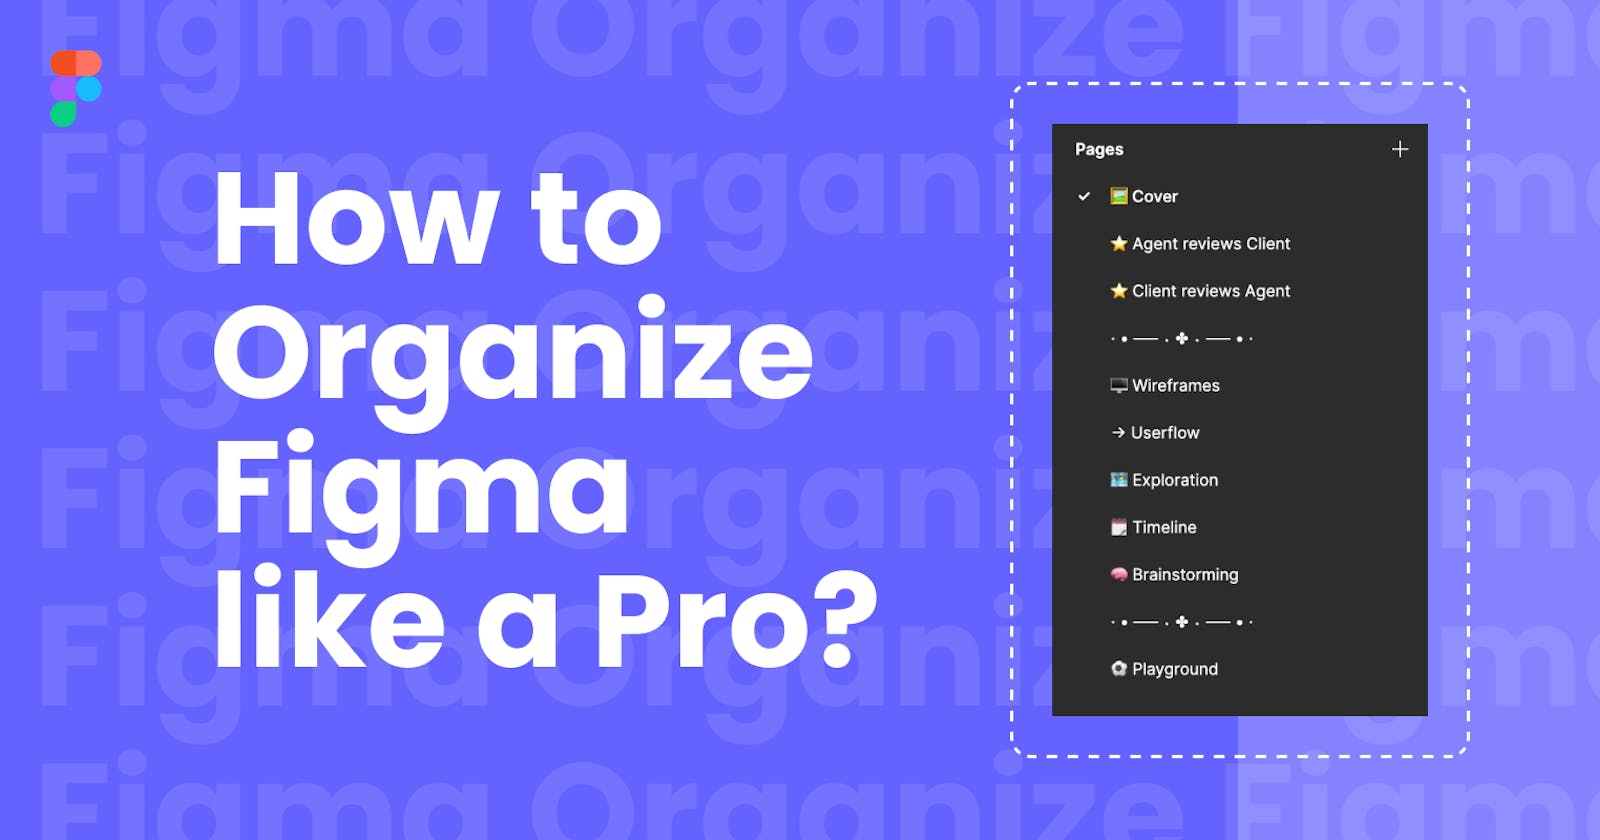 From Chaos to Order: How to Organize Figma like a Pro?